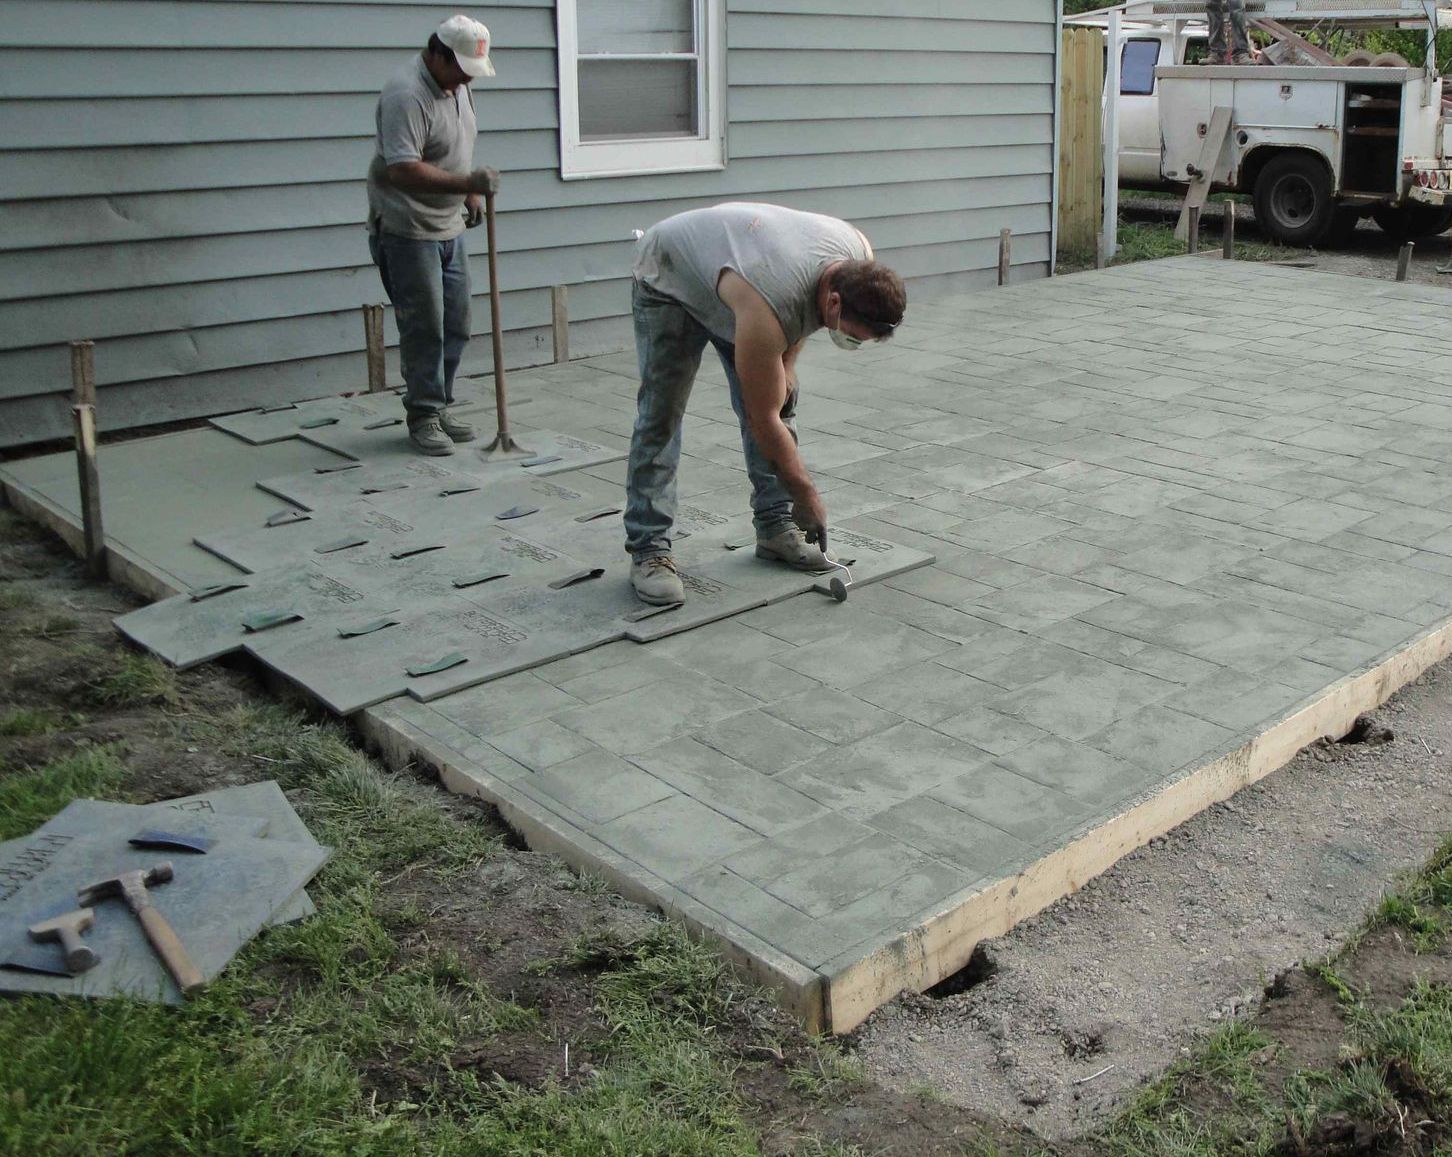 Workers Installing Stamped Concrete Patio In Backyard